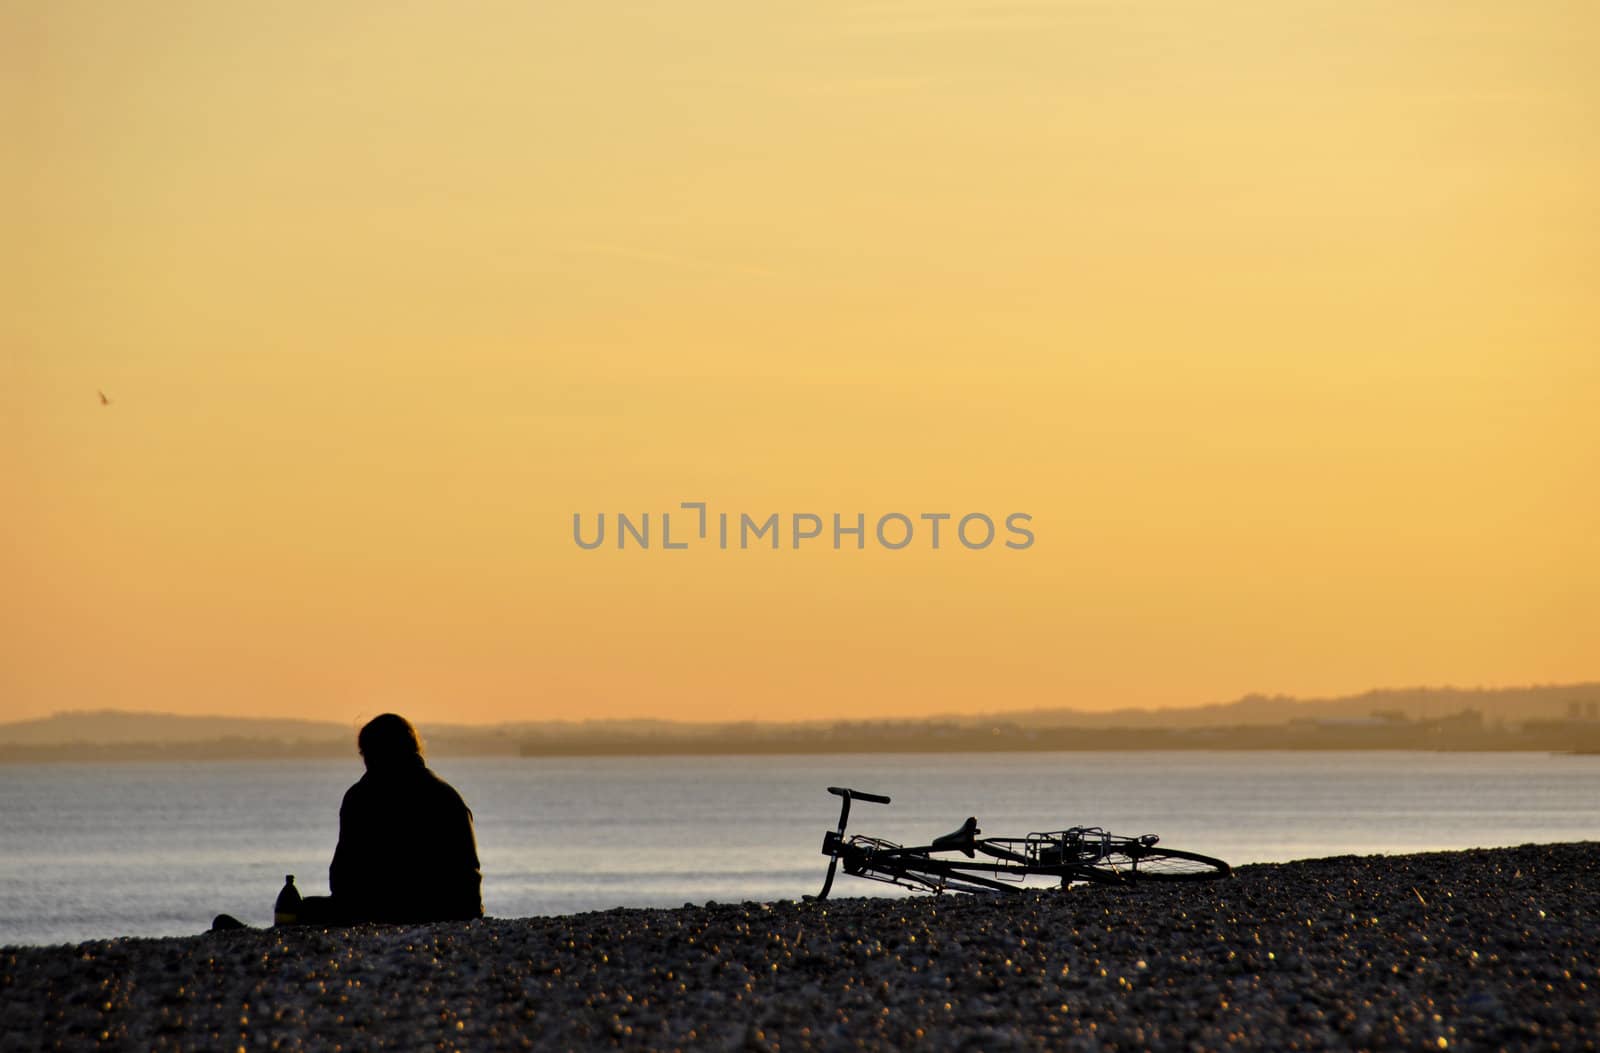 A sitting man and his bicycle on a pebble beach at sunset